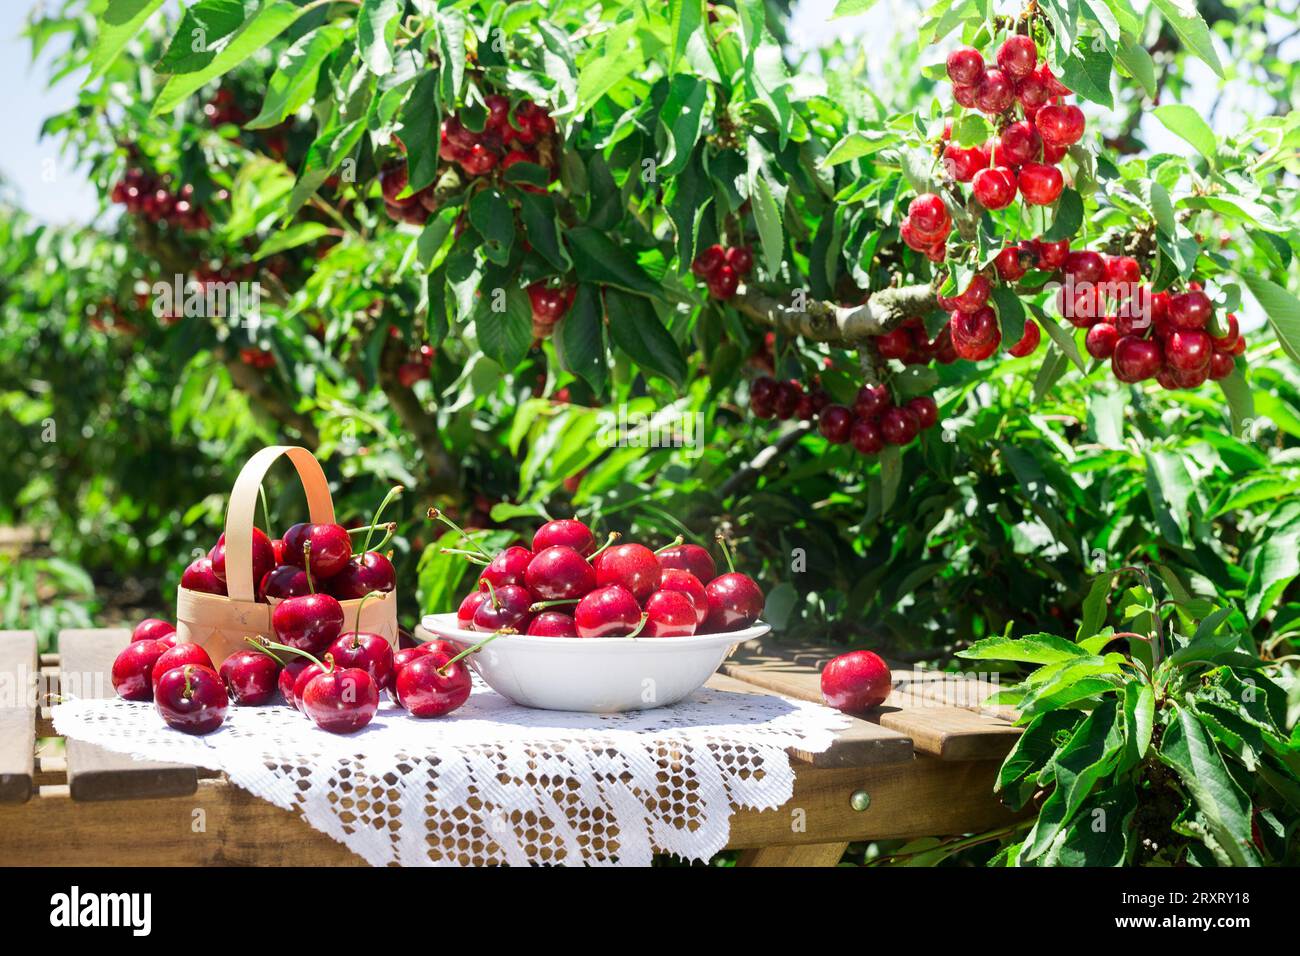 Cherries in a basket and on a plate are on the table Stock Photo